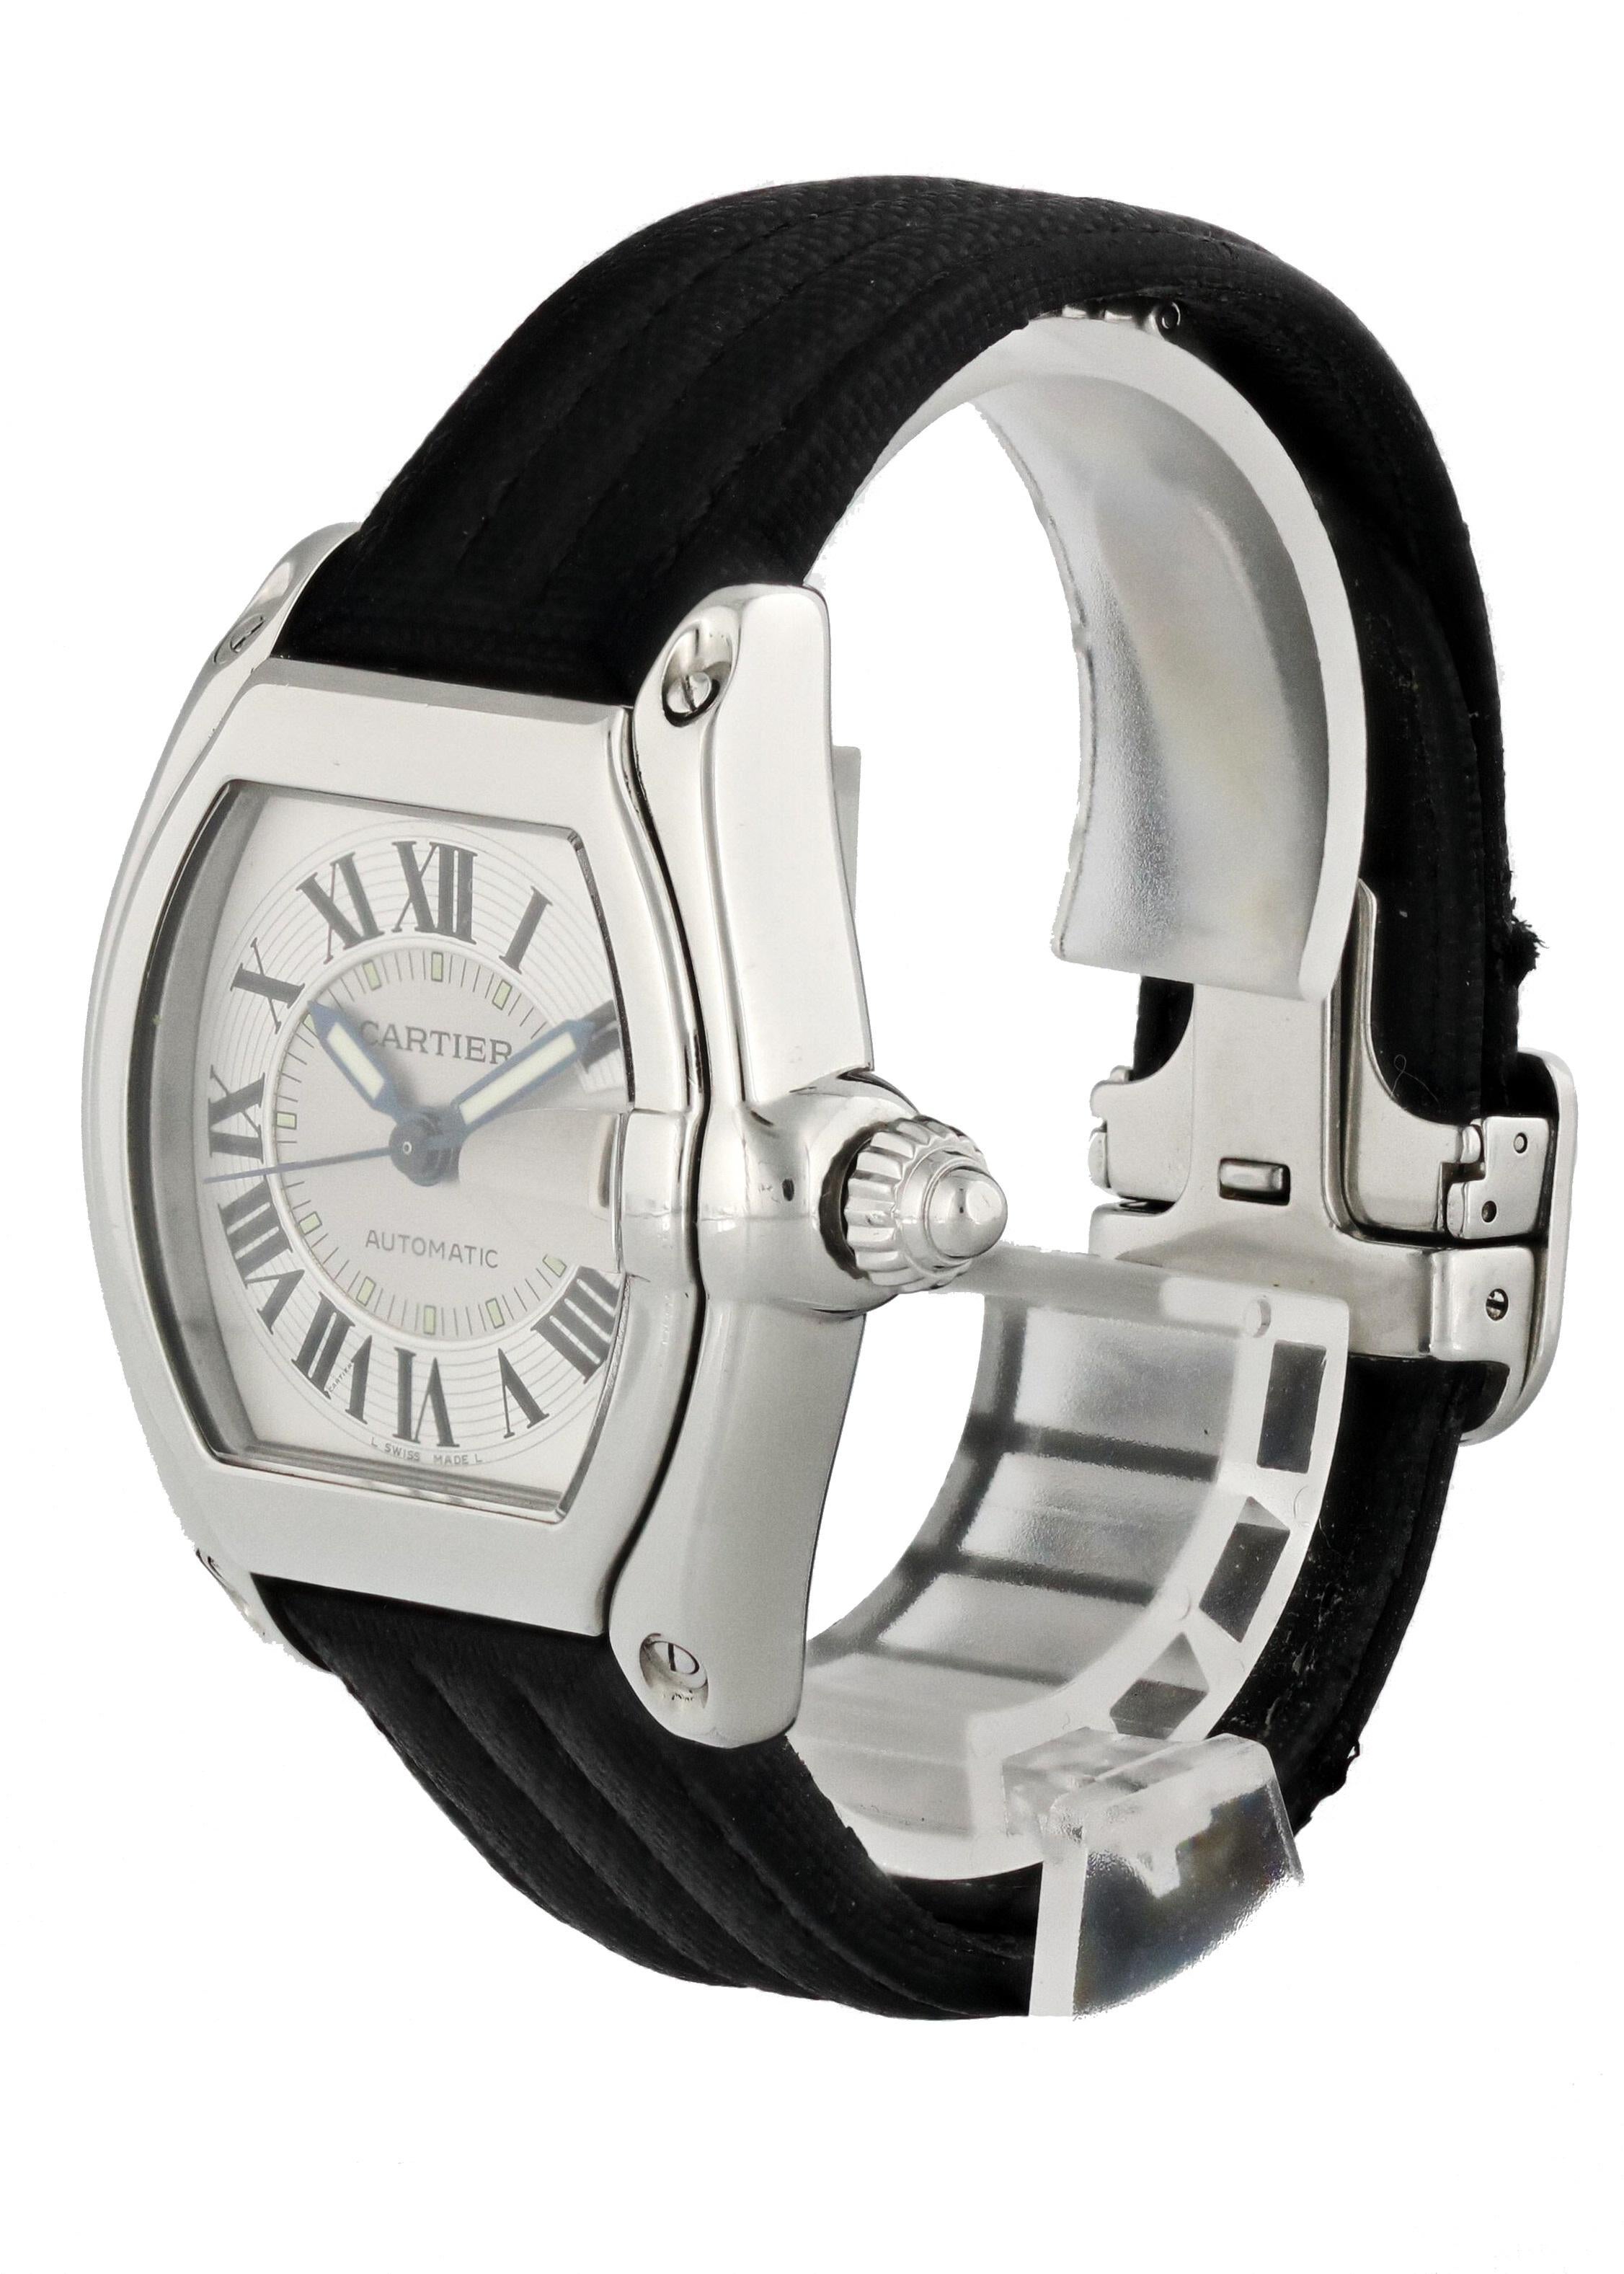 Cartier Roadster Professional 2618 Men Watch. 40mm Stainless Steel case. Stainless Steel Stationary bezel. Black dial with Luminous Steel hands and Roman numeral hour markers. Minute markers on the outer dial. Date display at the 3 o'clock position.